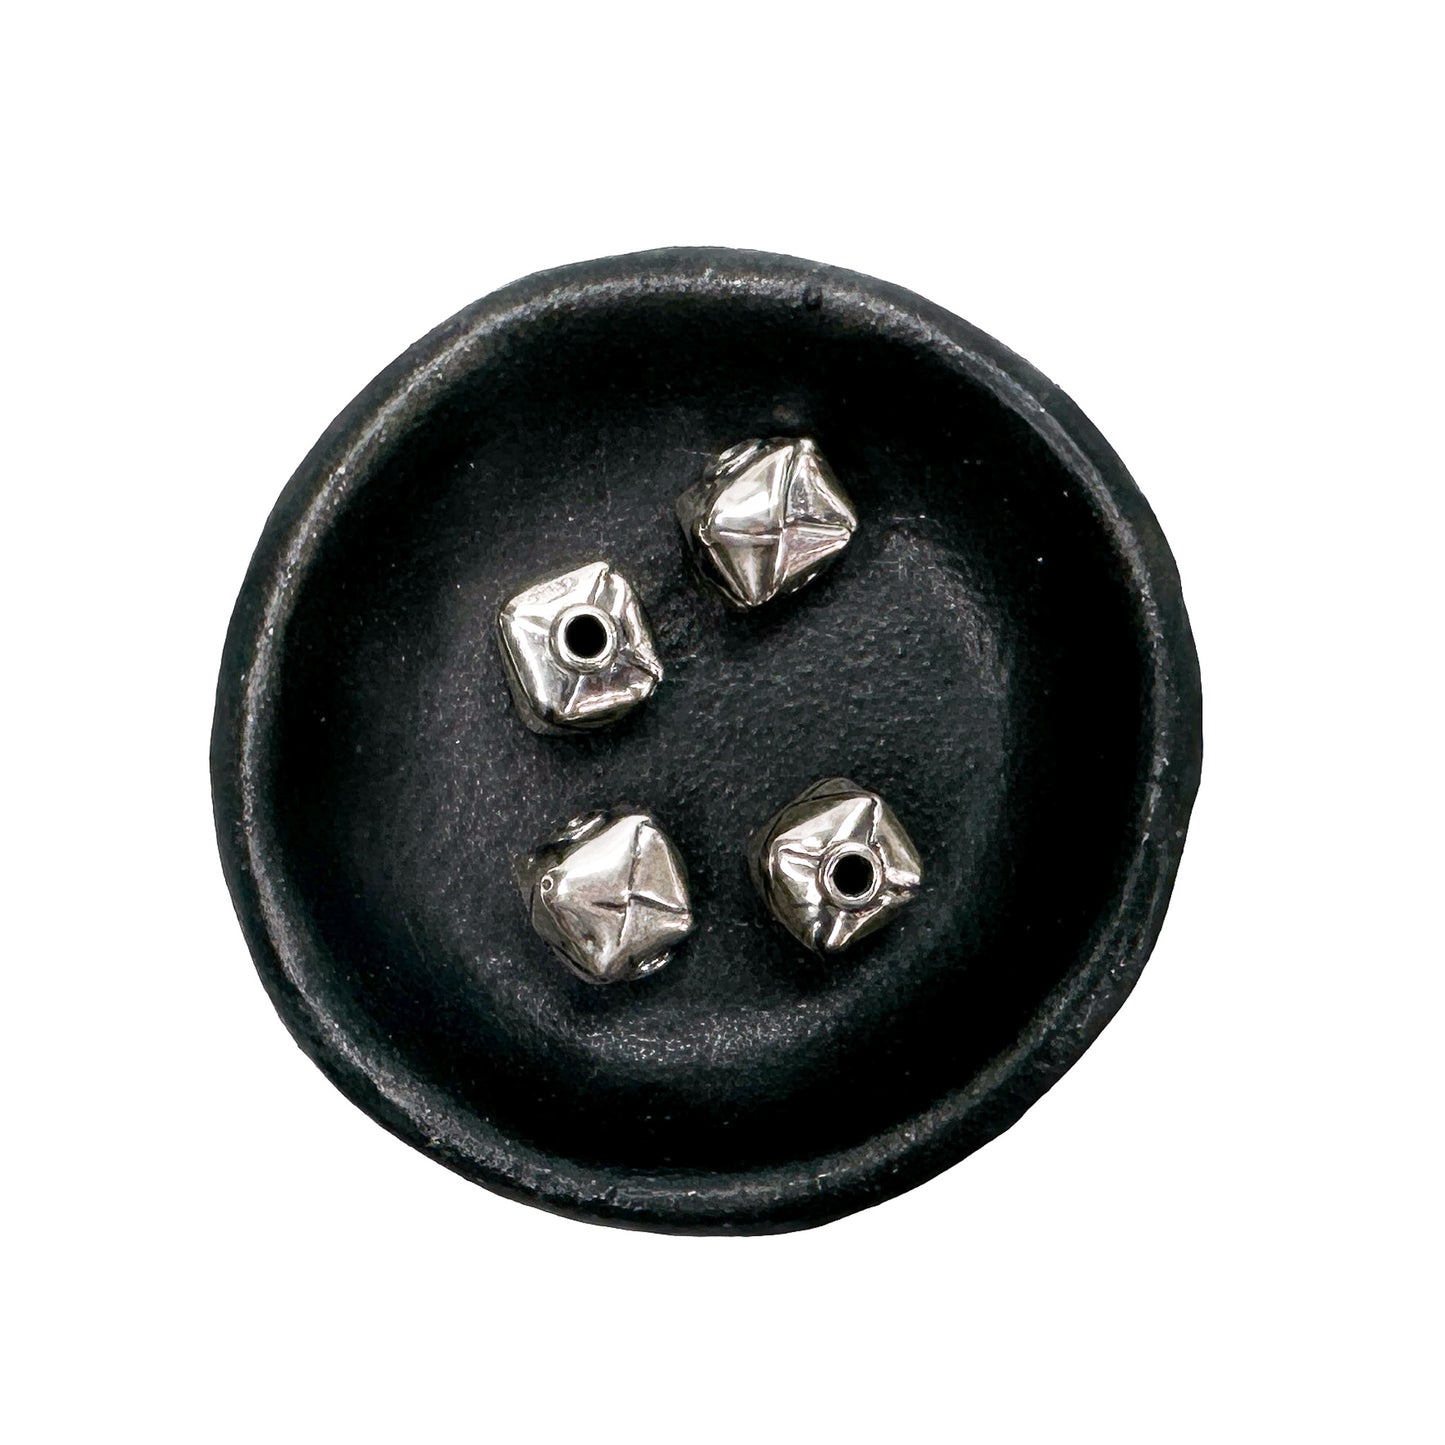 Paper Box 10mm Bead (Sterling Silver) - 1 pc.-The Bead Gallery Honolulu